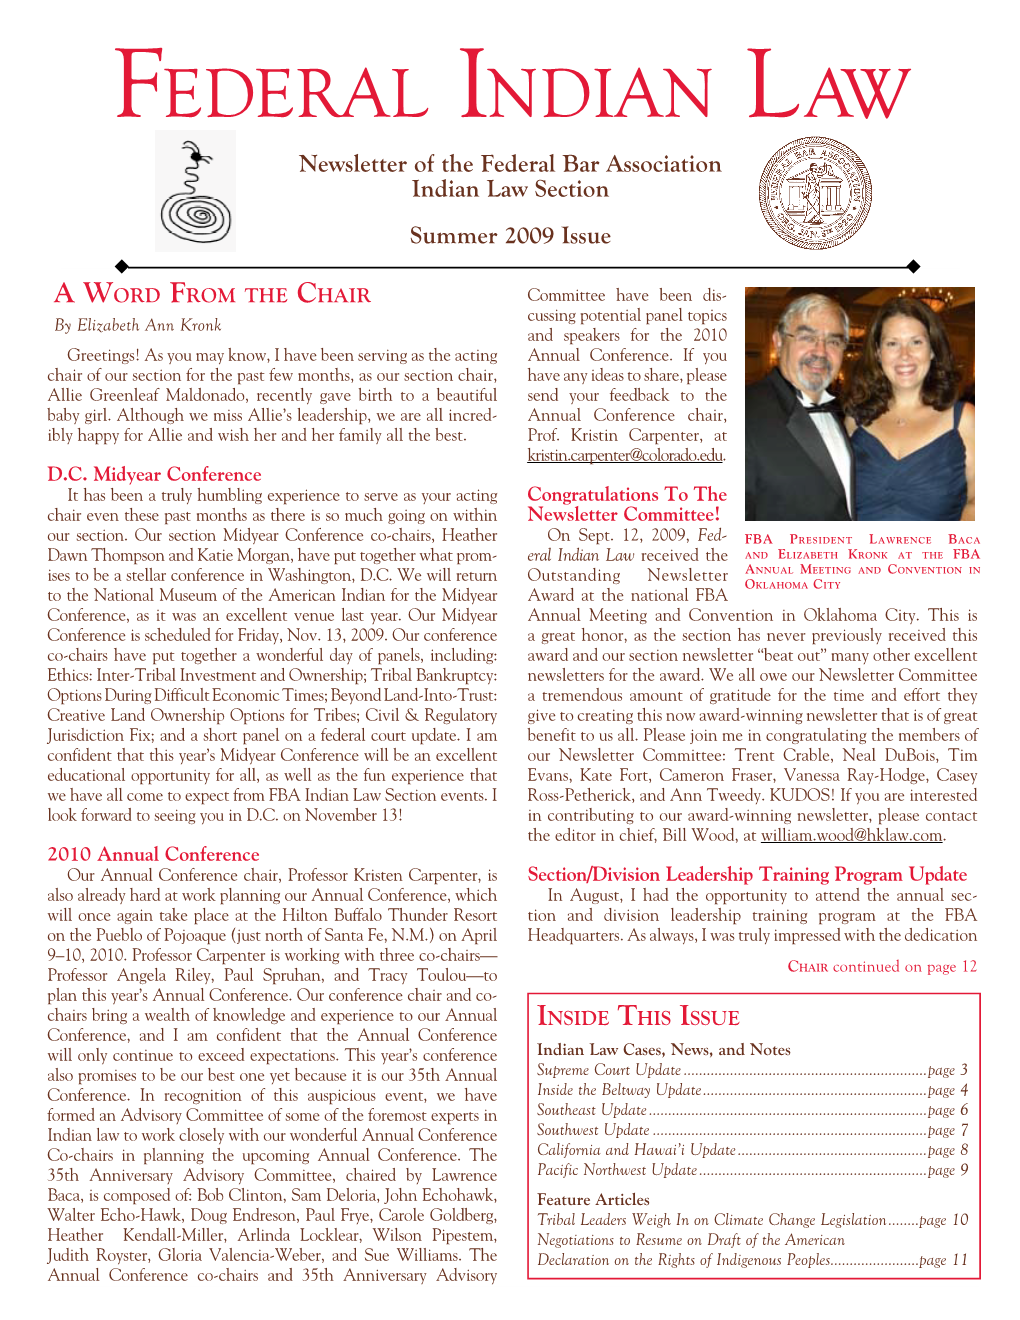 Federal Indian Law Newsletter Board William Wood Holland & Knight LLP Ed It O R in Ch I E F Dawn Baum Co N T R I B U Ti N G Ed It O R , Wa S H I N G T O N , D.C